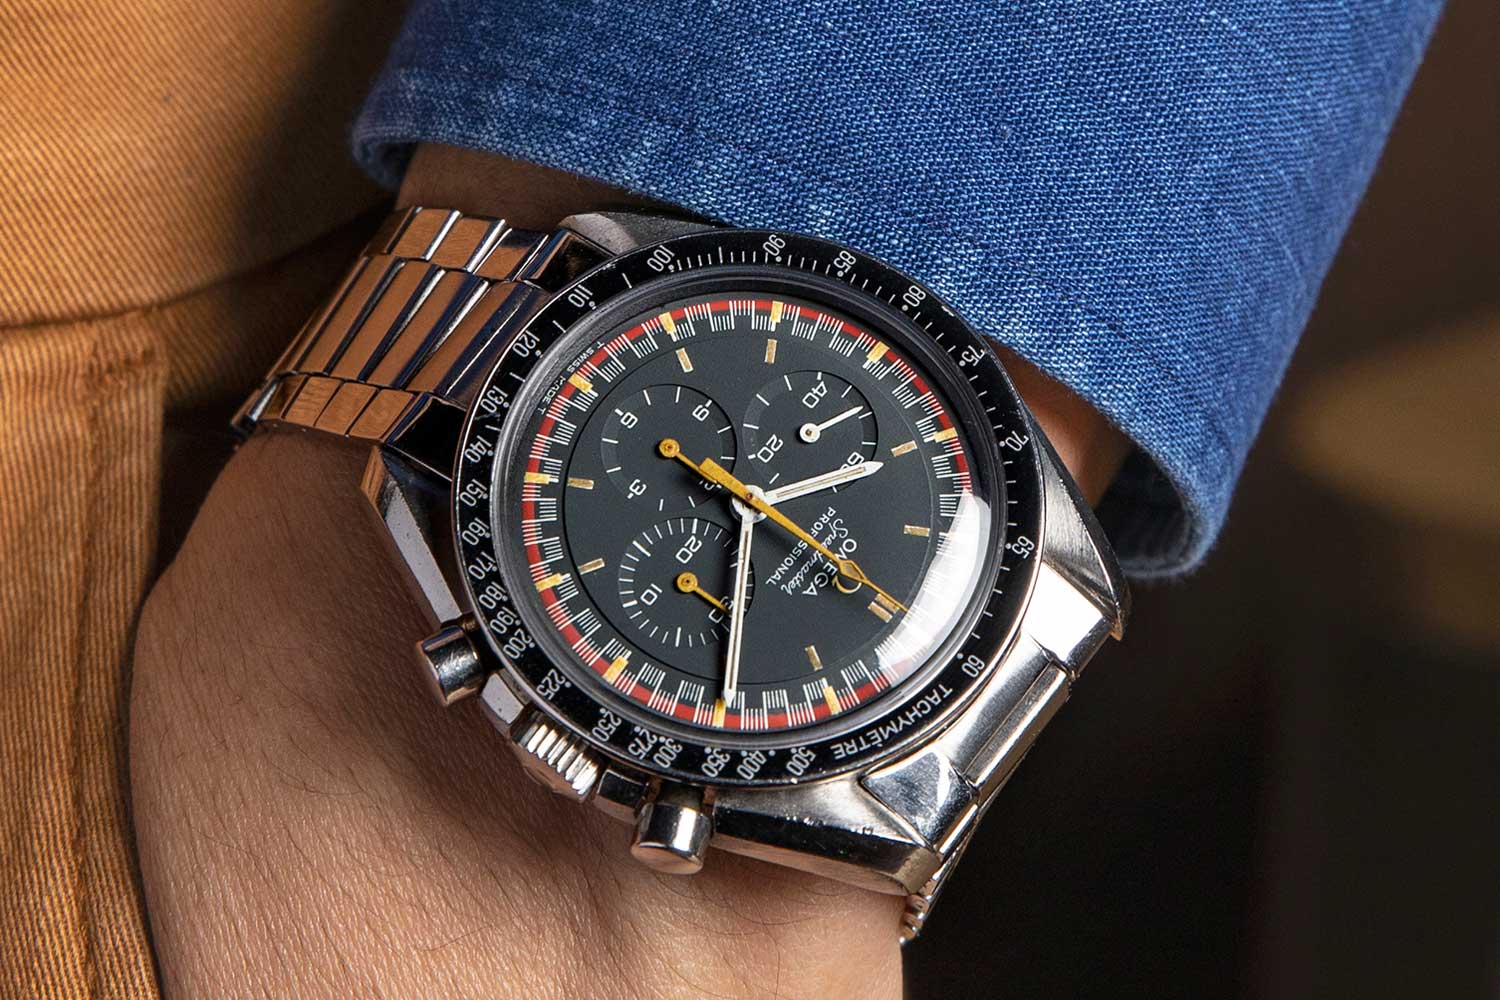 The Speedmaster Reference 145.022-69 with the Racing Dial and orange arrow-tipped central chrono hand (©Revolution)